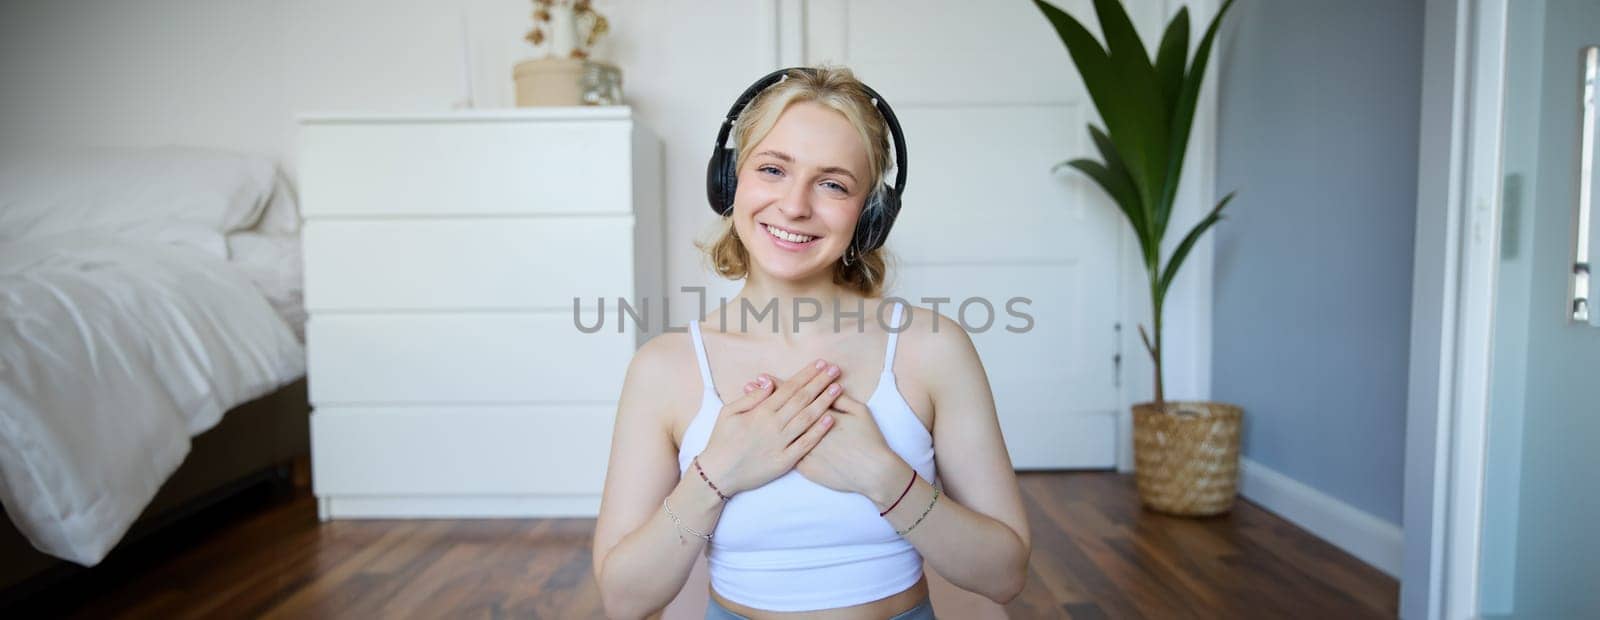 Portrait of woman feeling relaxed and in peace after meditation or yoga training at home, holding hands on chest, wearing headphones, smiling at camera.